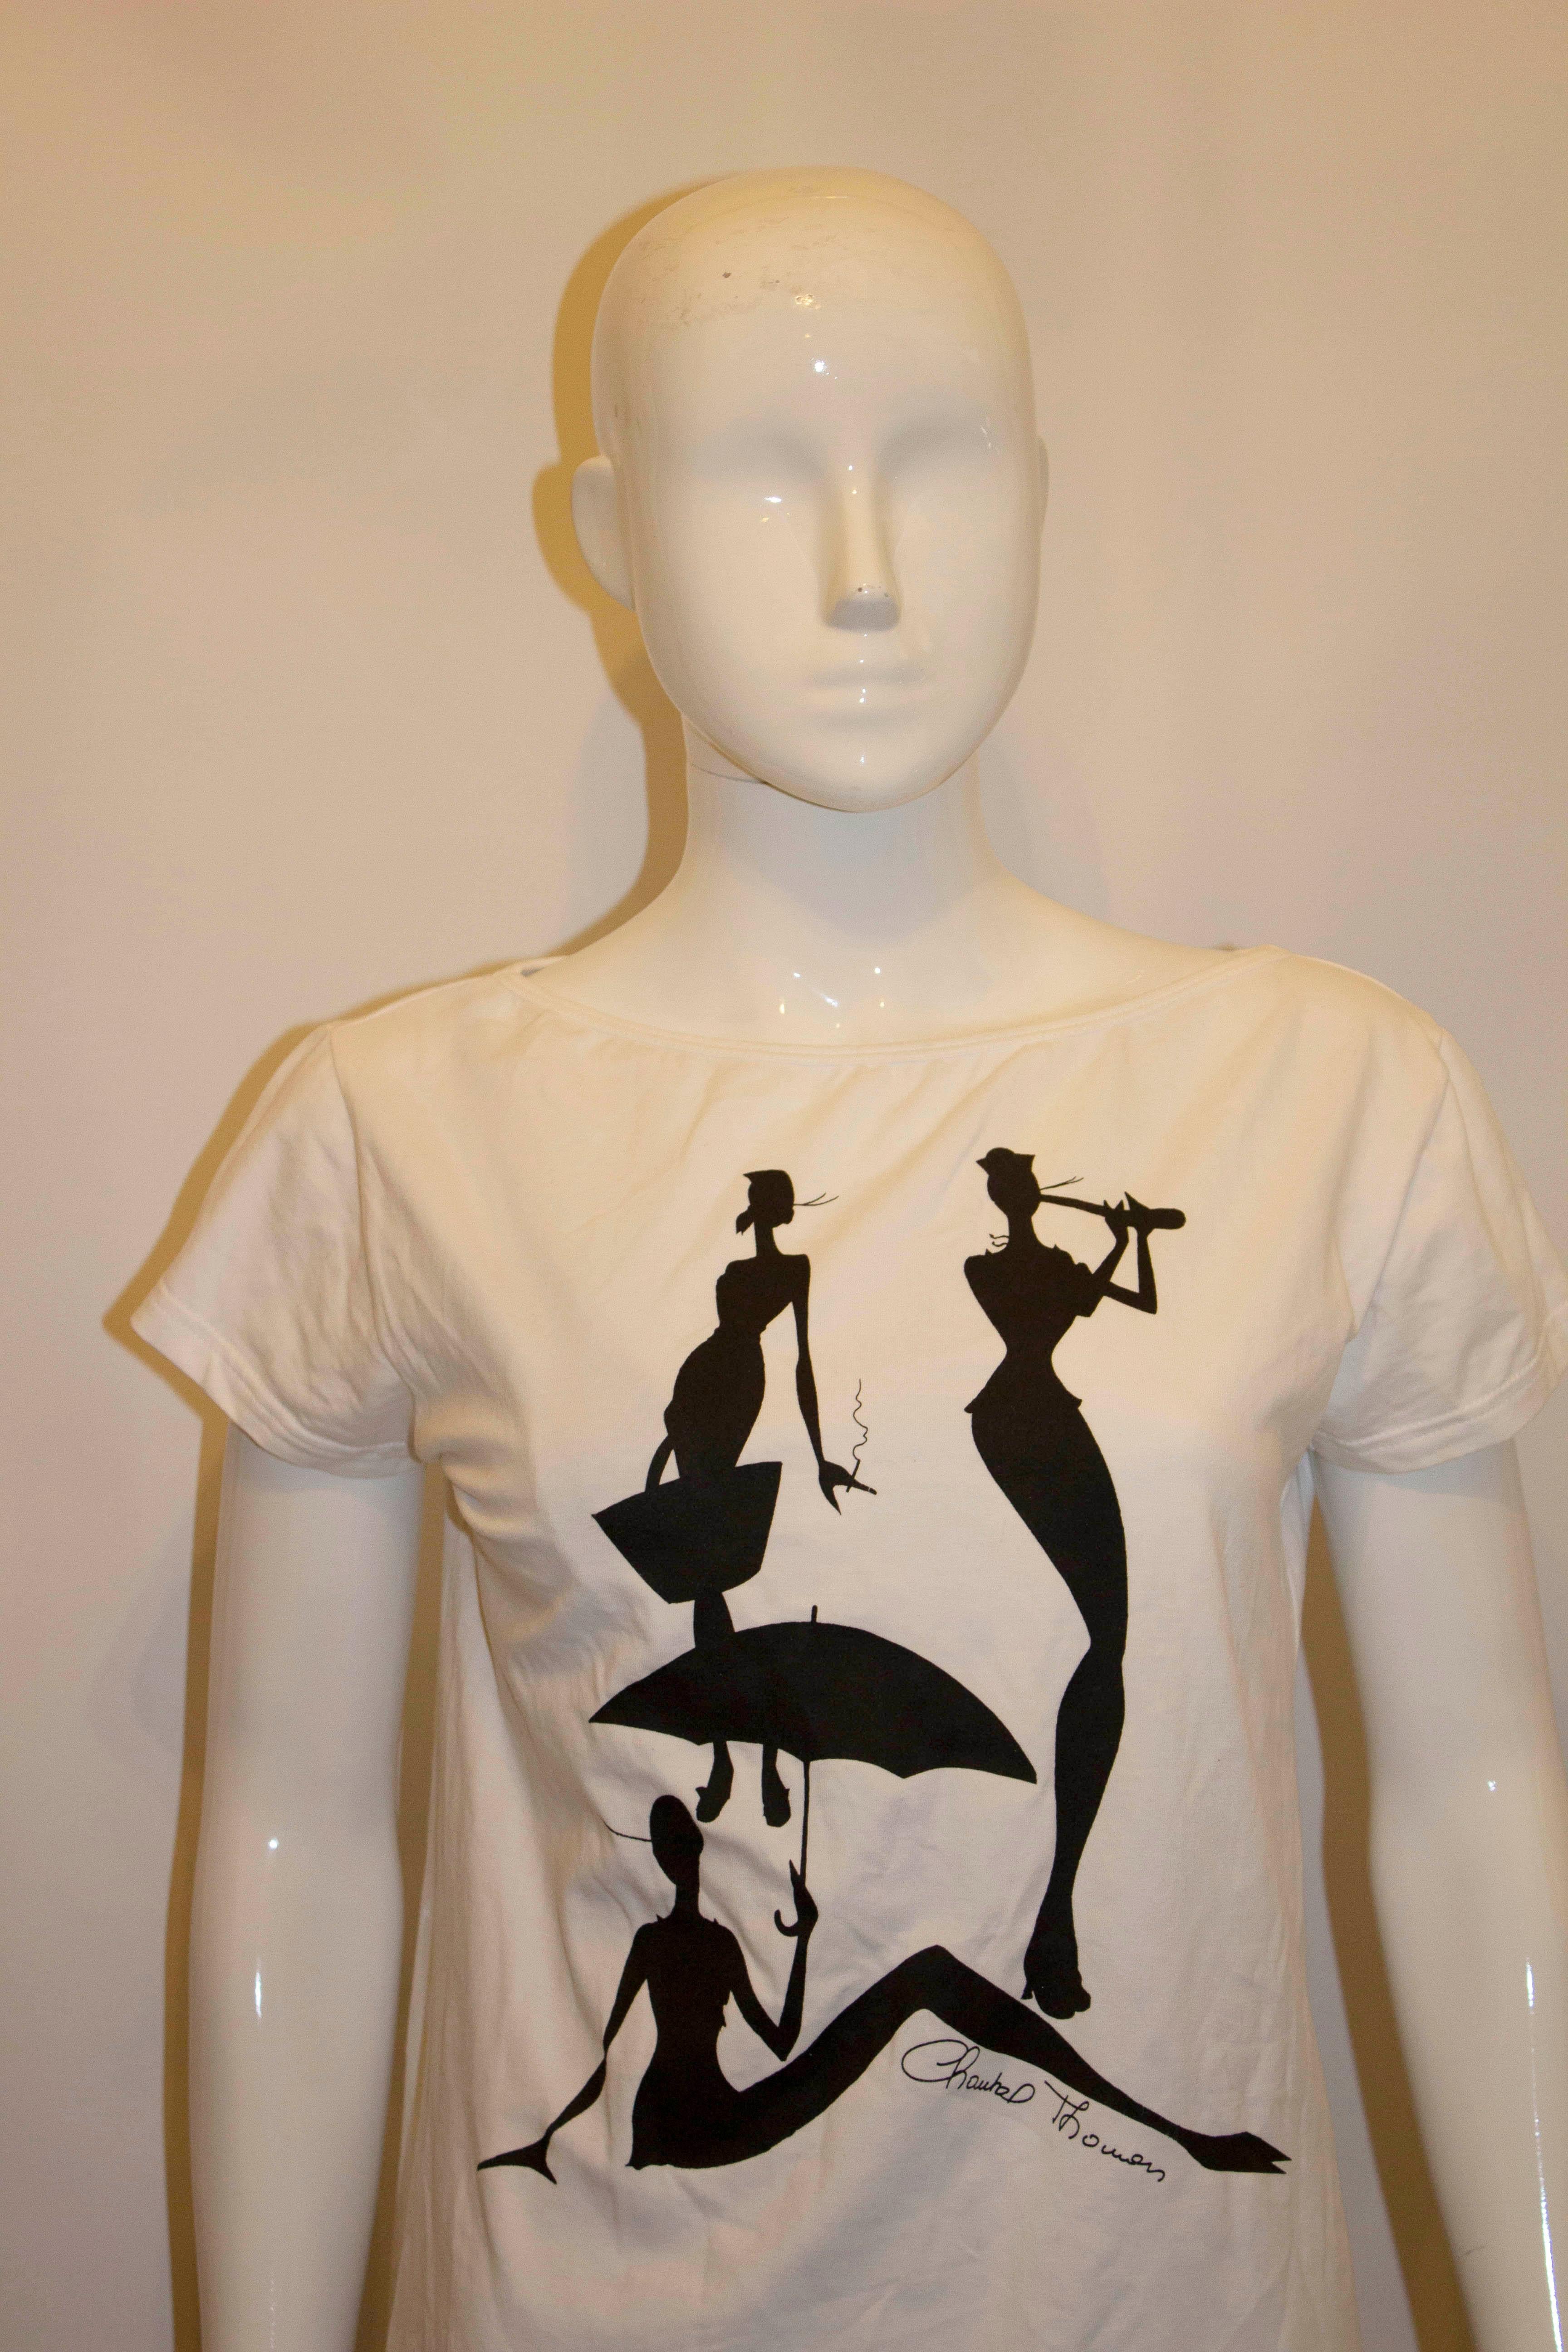 A chic Summer T shirt from French designer Chantal Thomass. In a super soft cotton,  the white T shirt has an attractive black design. 
Made in Italy, Size L Bust 38'',length 25''